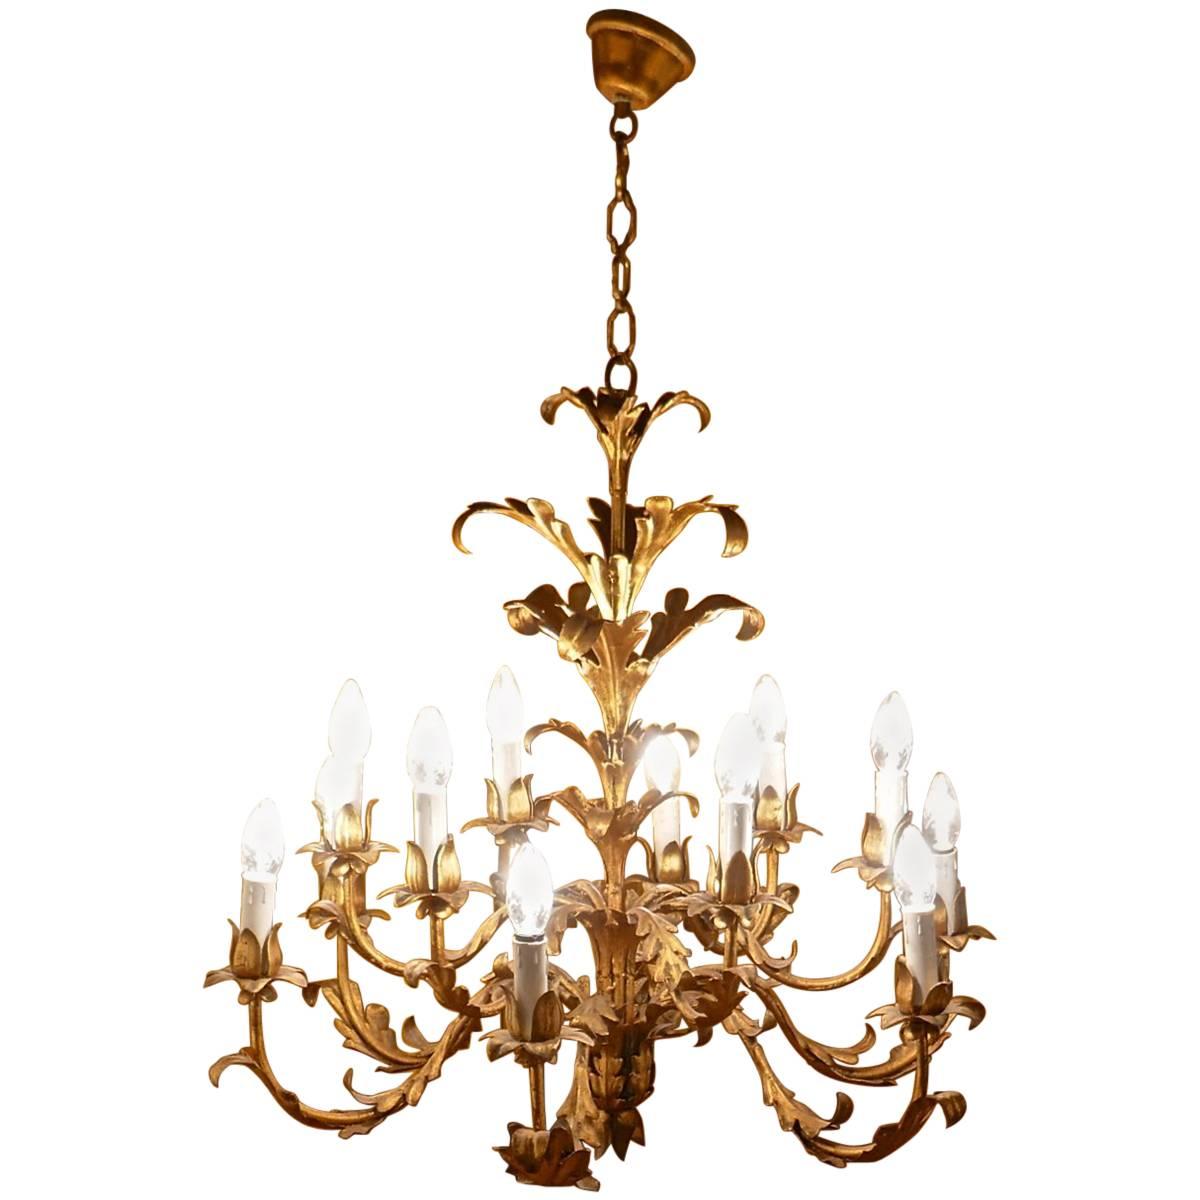 Very Large French 12 Branch Gold Tole Chandelier